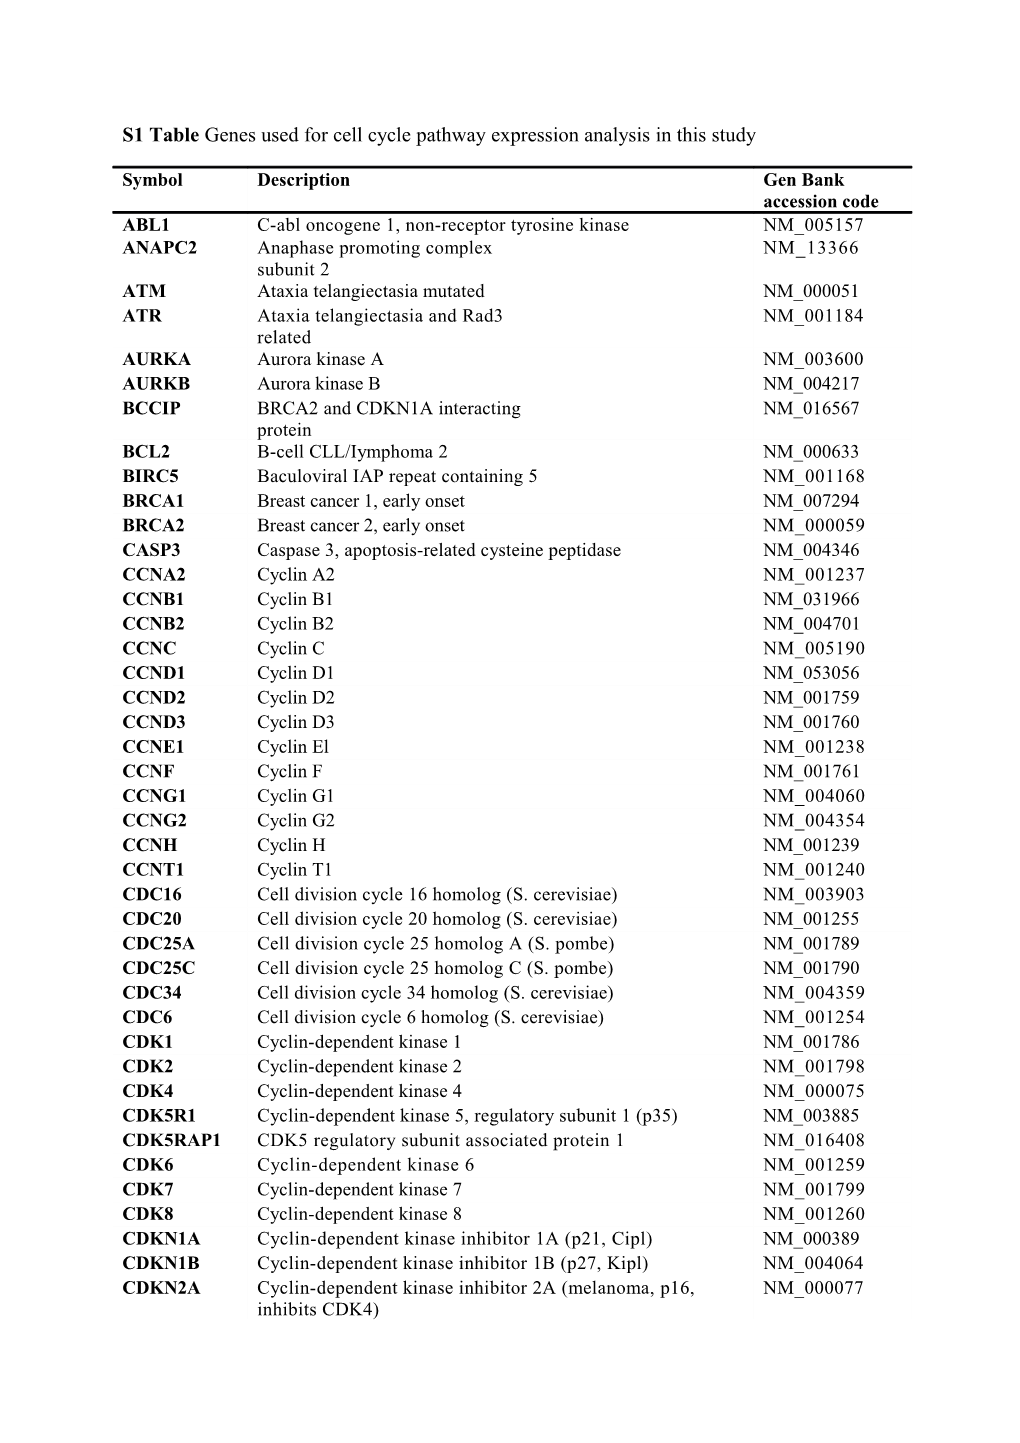 S1 Table Genes Used for Cell Cycle Pathway Expression Analysis in This Study